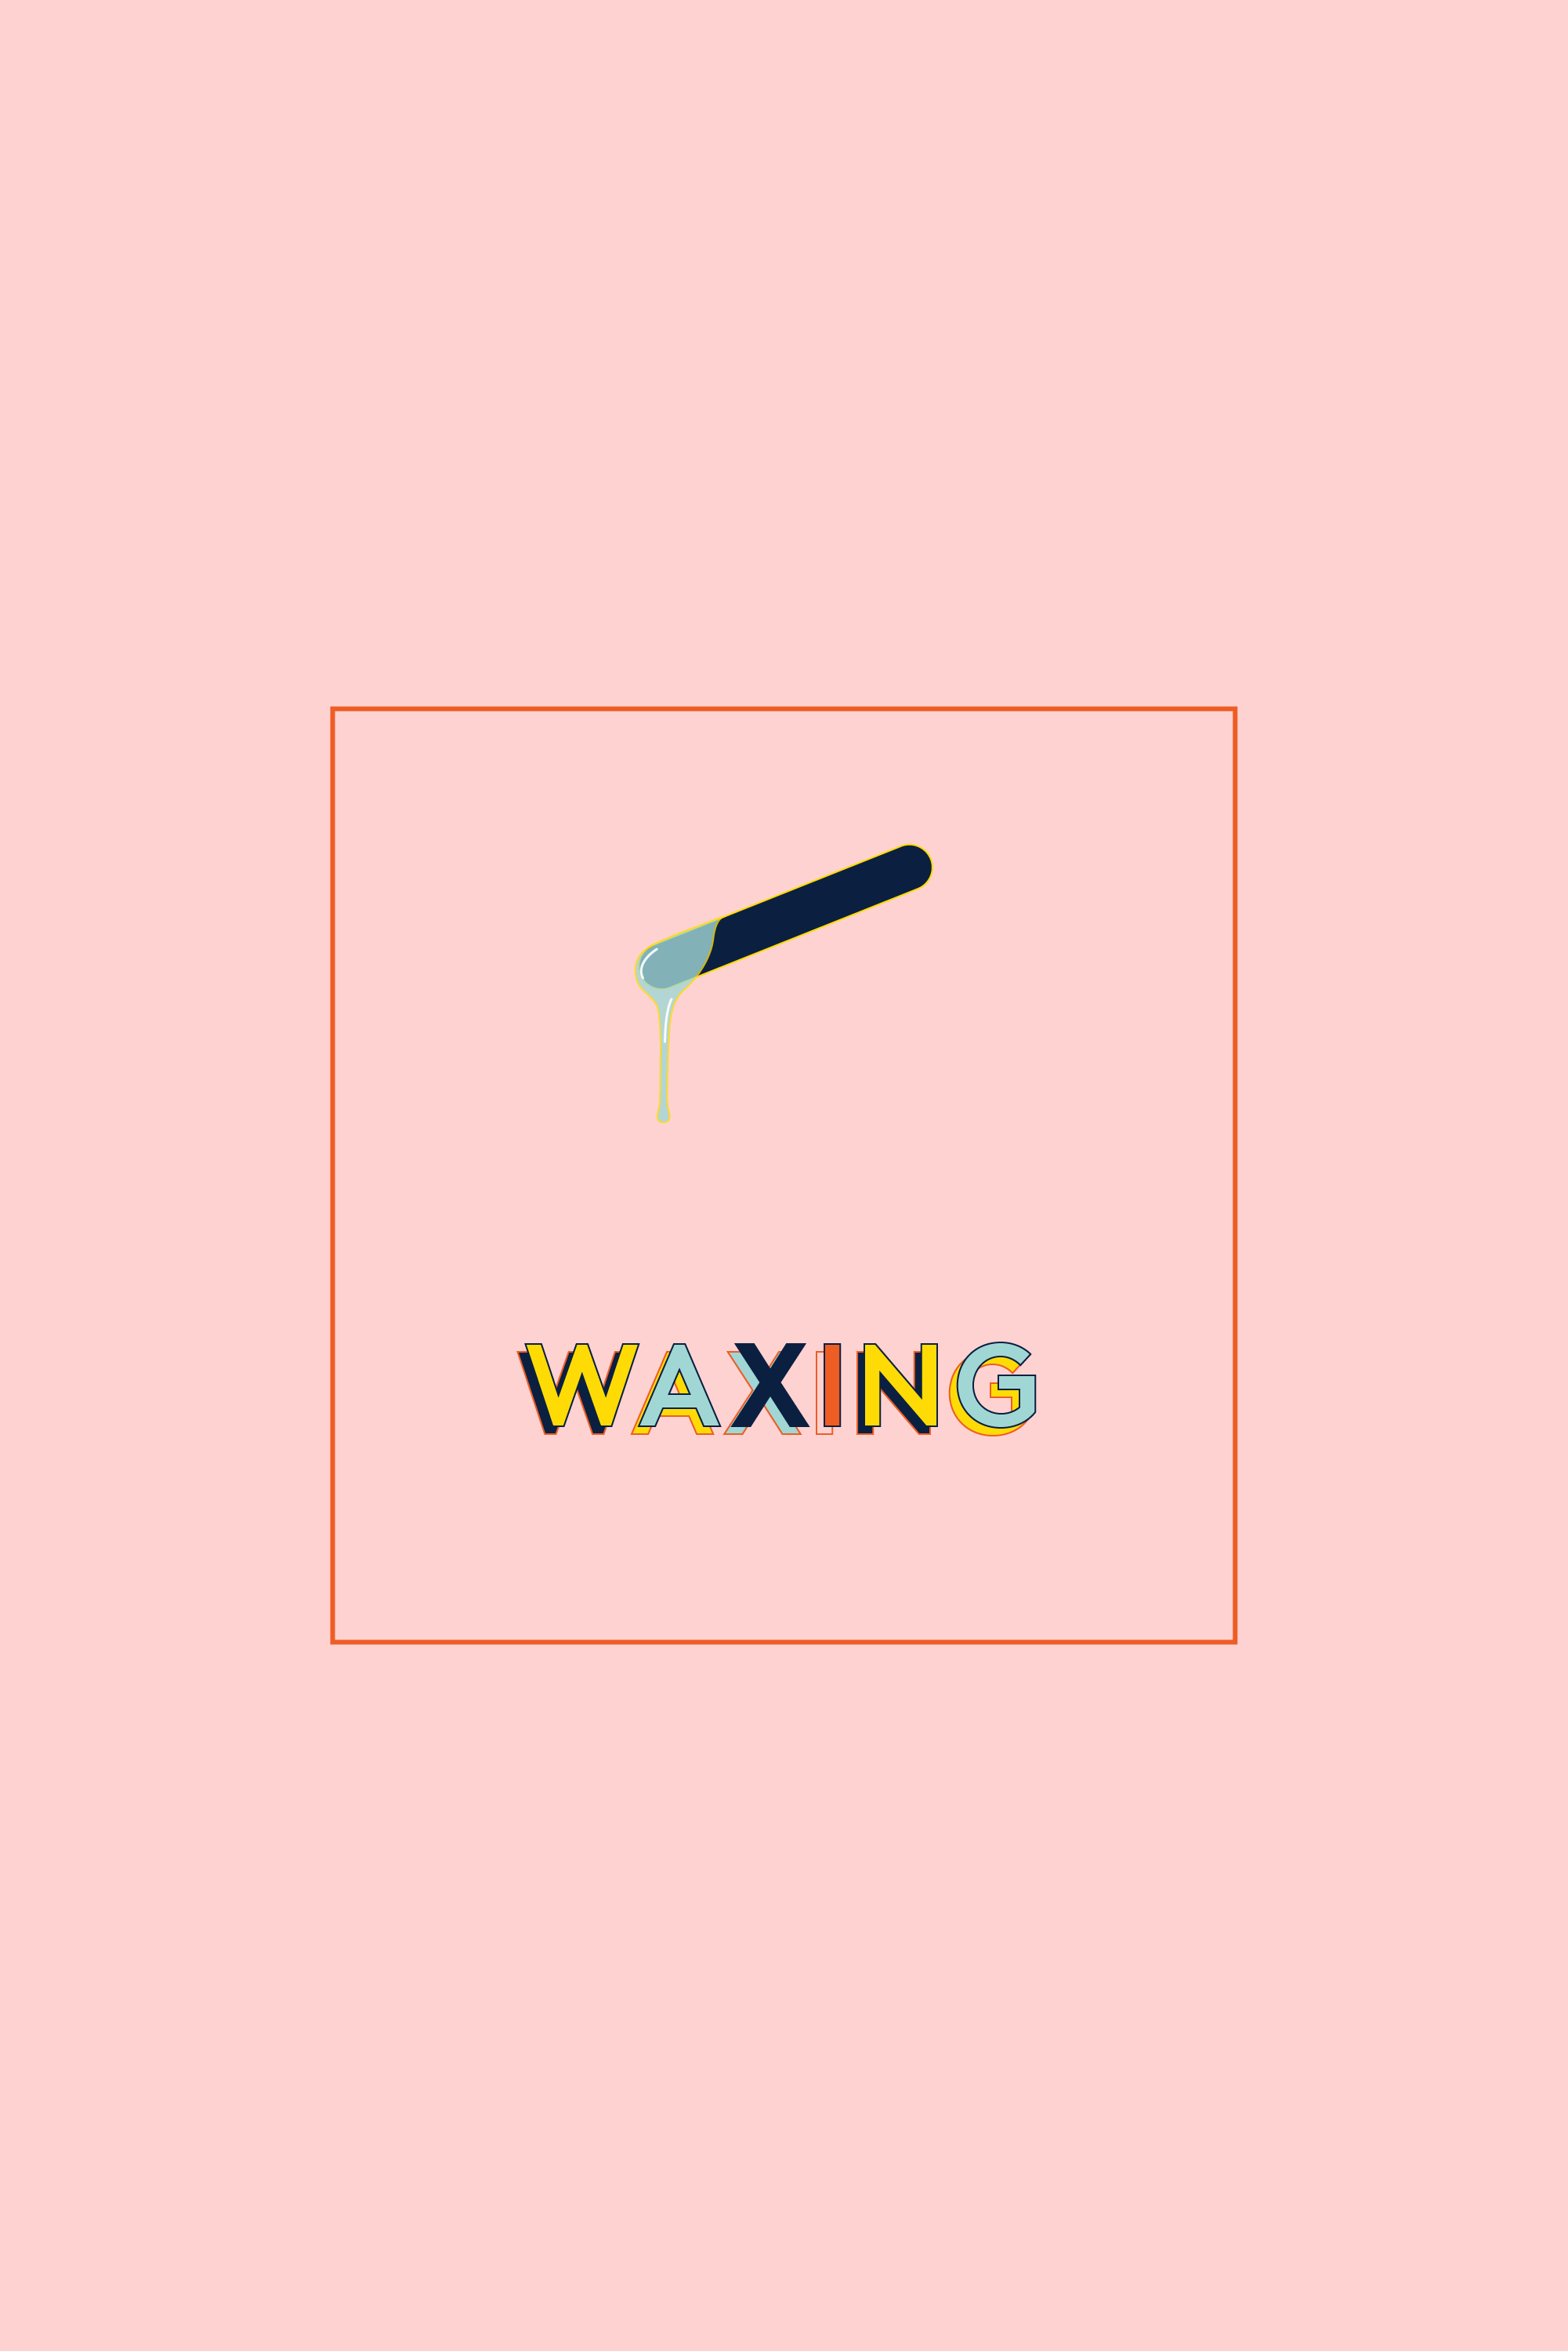 Waxing Logo - What Not To Do On Your Period - Waxing Facials Masks